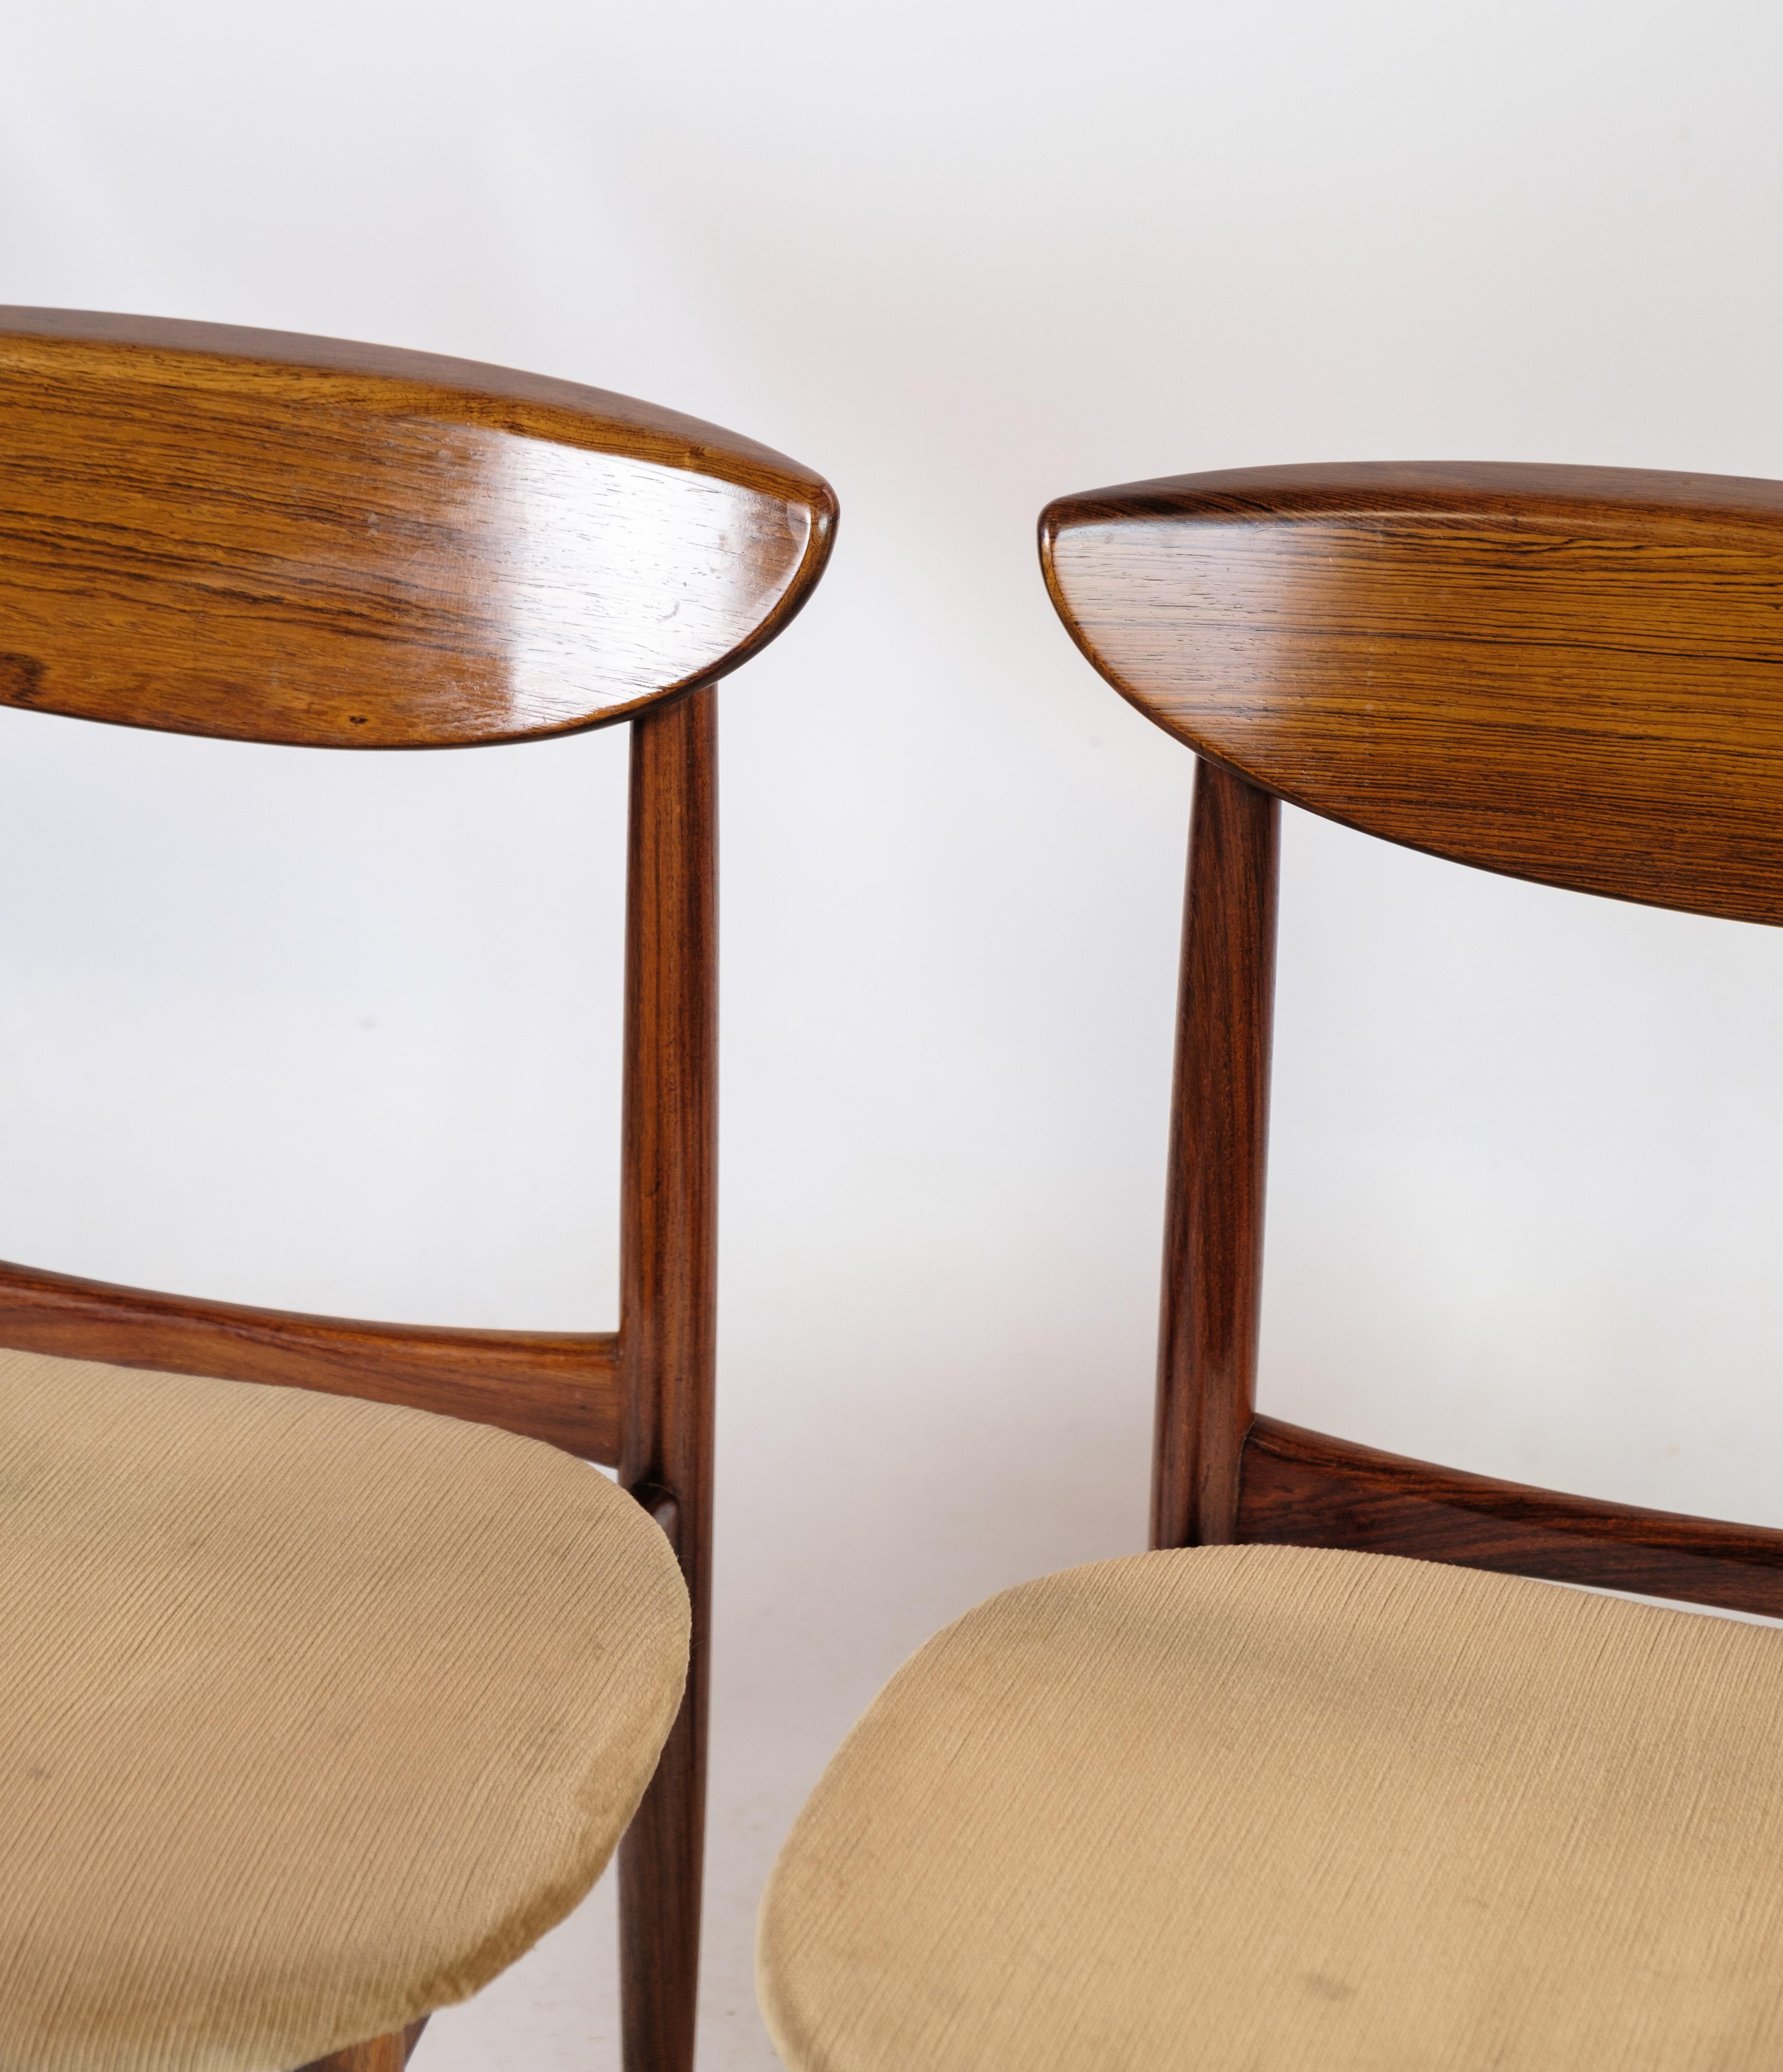 Set of 2 Chairs Made In Rosewood By Peter Hvidt From 1960s In Good Condition For Sale In Lejre, DK